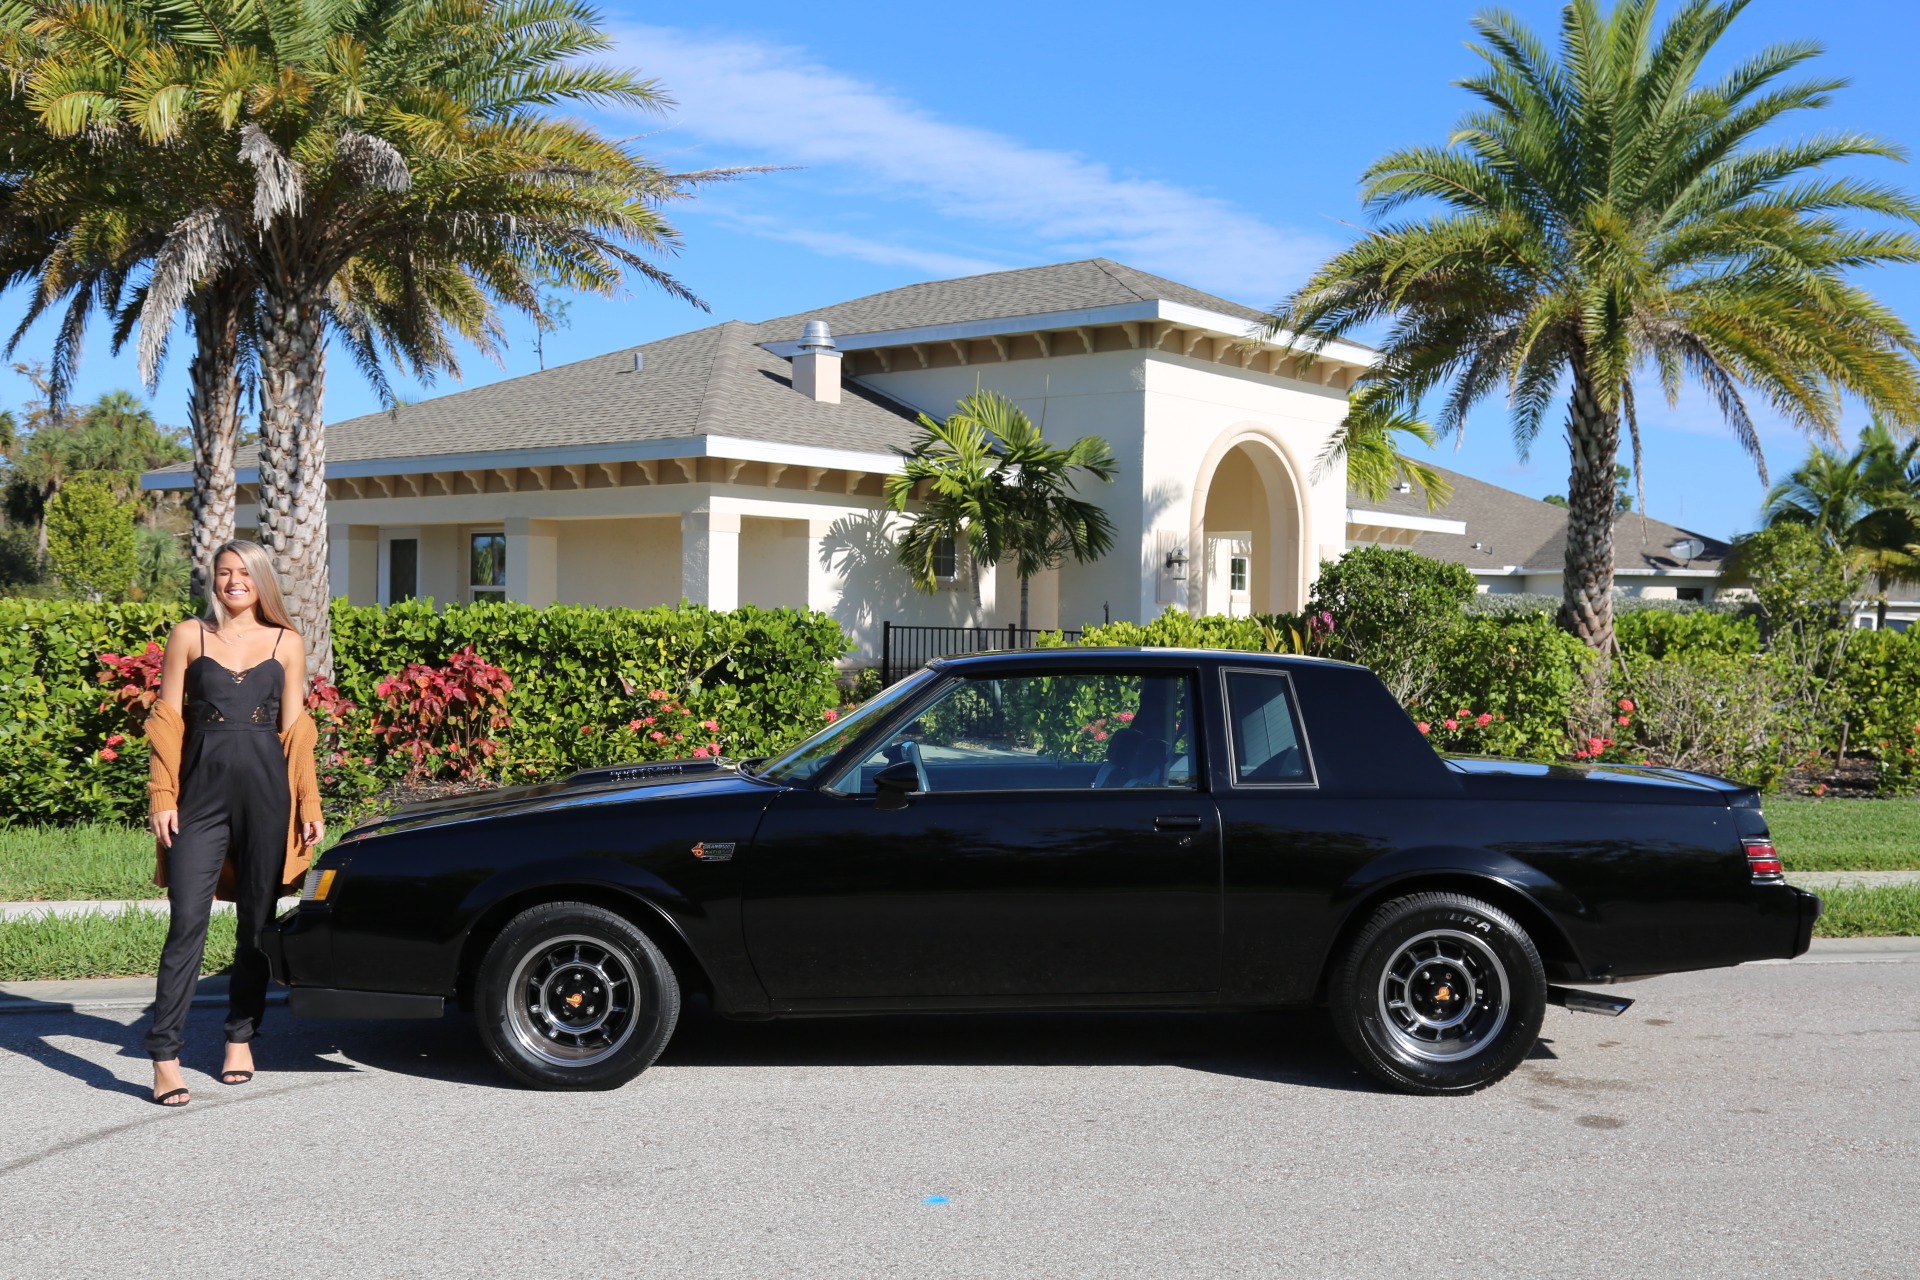 Used 1987 Buick Grand National Turbo Grand National Turbo for sale Sold at Muscle Cars for Sale Inc. in Fort Myers FL 33912 8